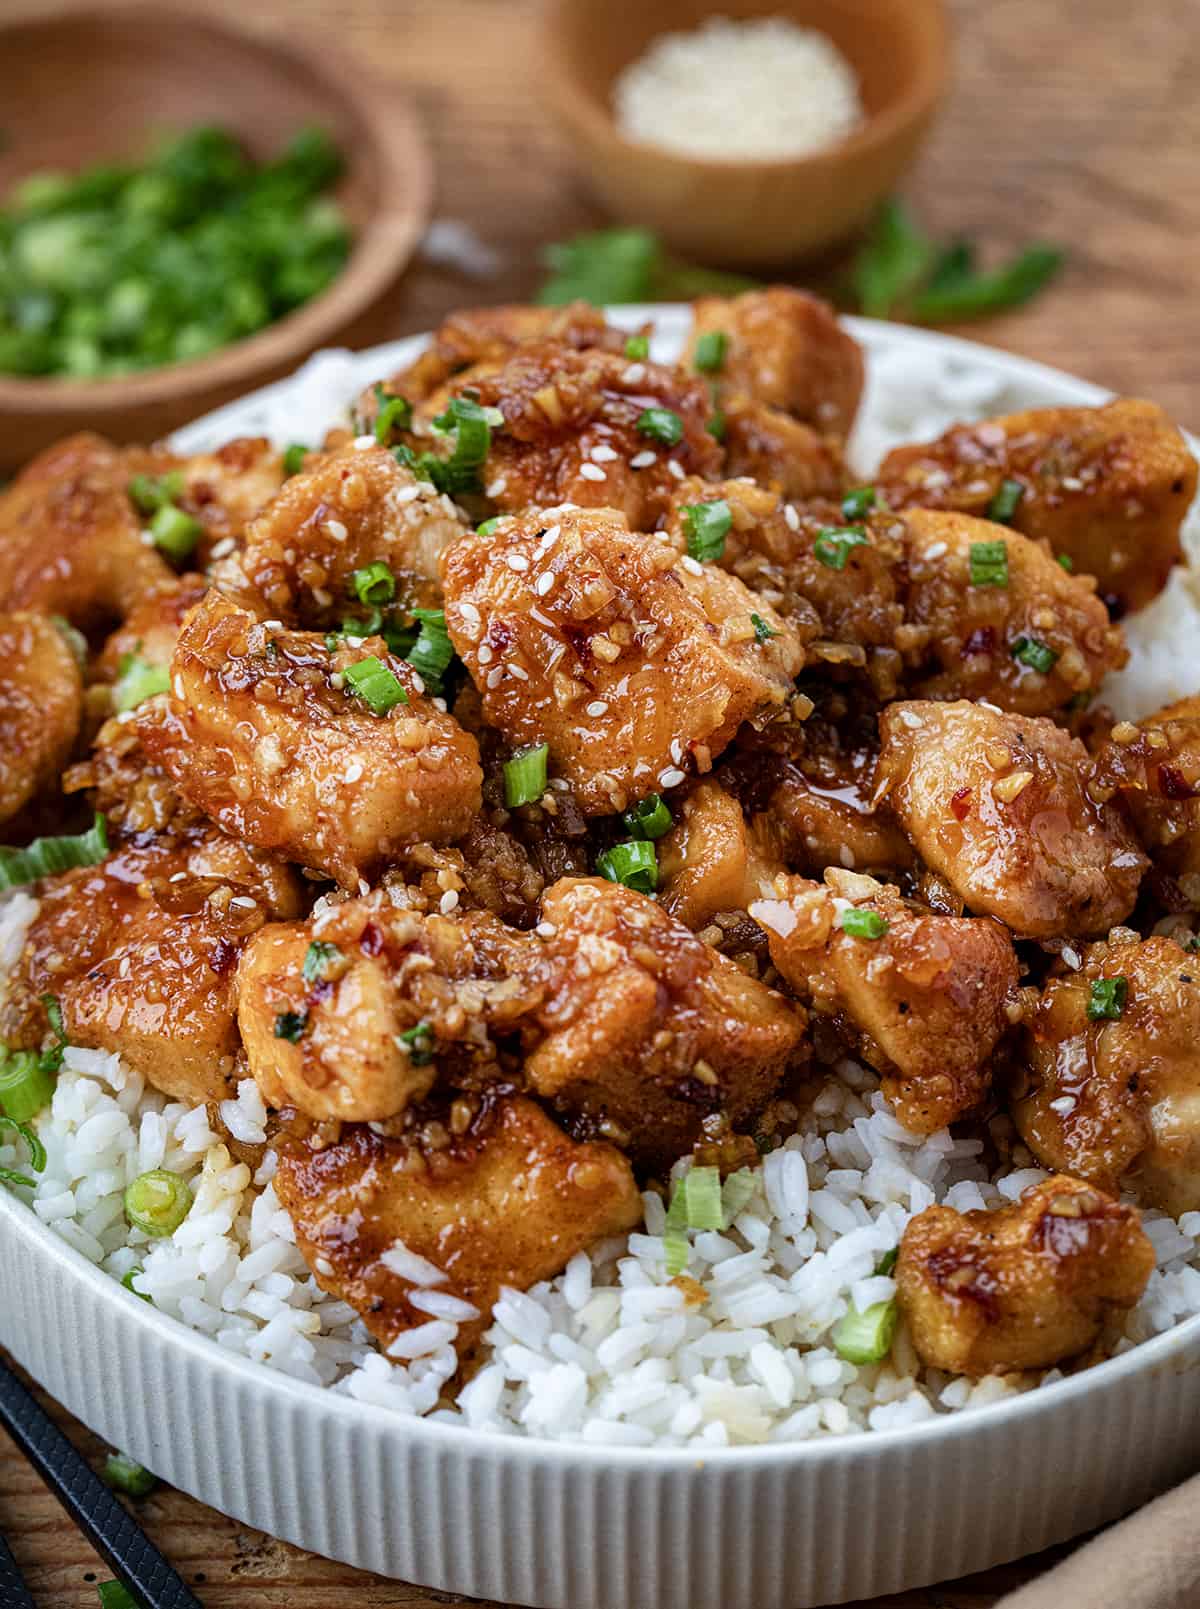 Plate of Honey Garlic Chicken Bites on a bed of rice on a wooden table.